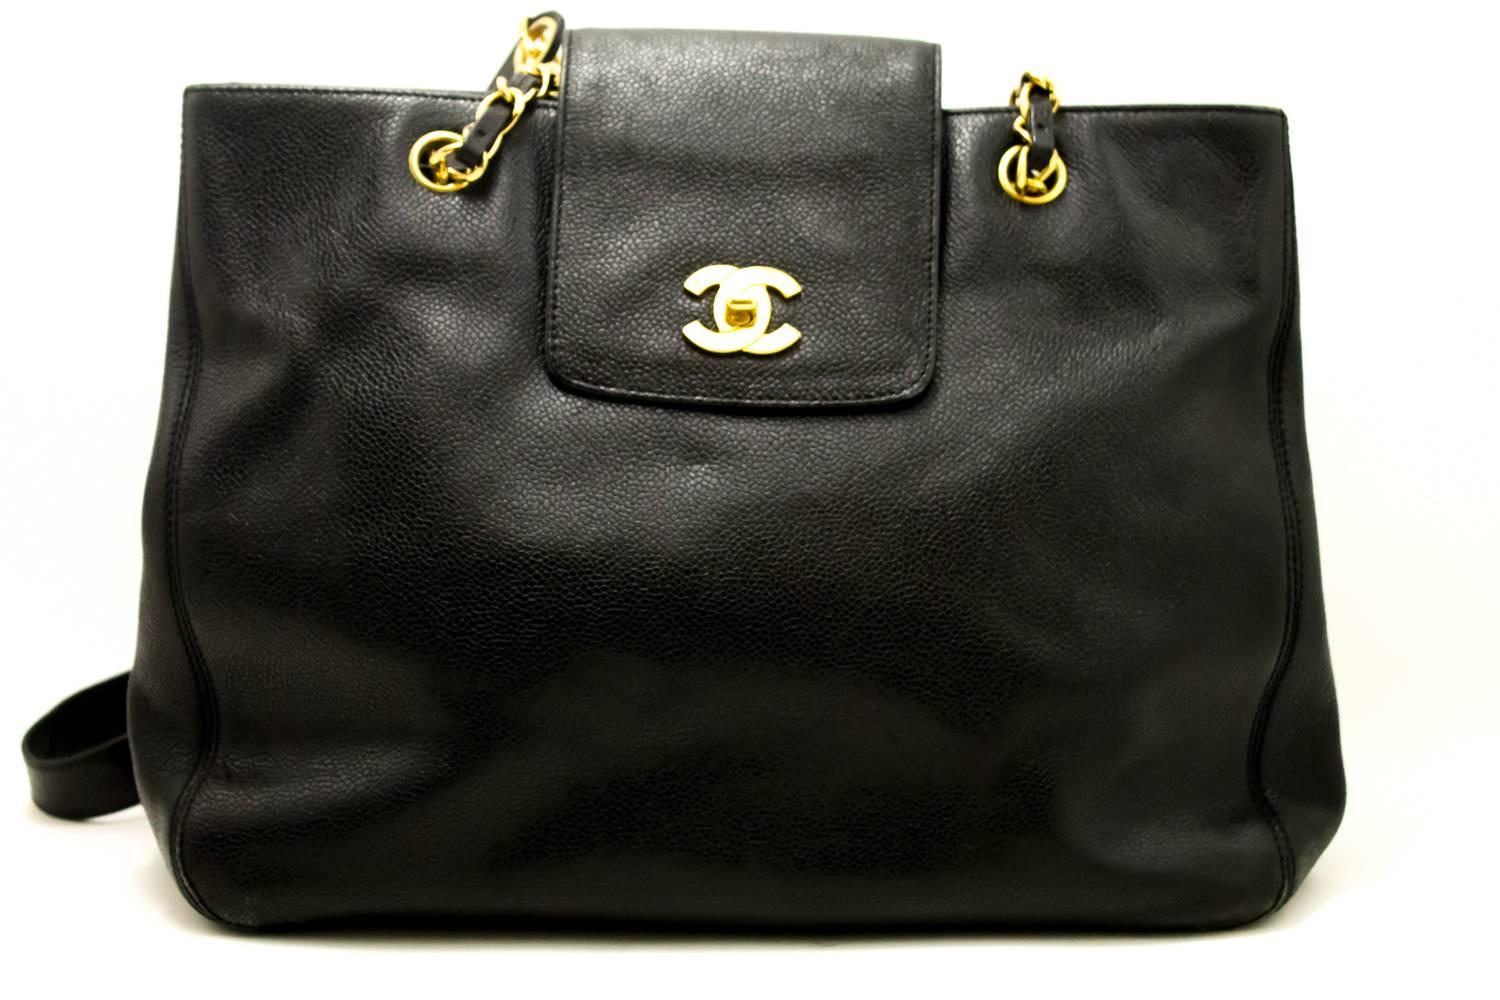 An authentic CHANEL Caviar Jumbo Large Chain Shoulder Bag Black Leather Gold  The outside material is Caviar leather.
Conditions & Ratings
Outside material: Caviar leather
Color: Black
Hardware and chain: Gold-tone
Made in Italy
Serial sticker: